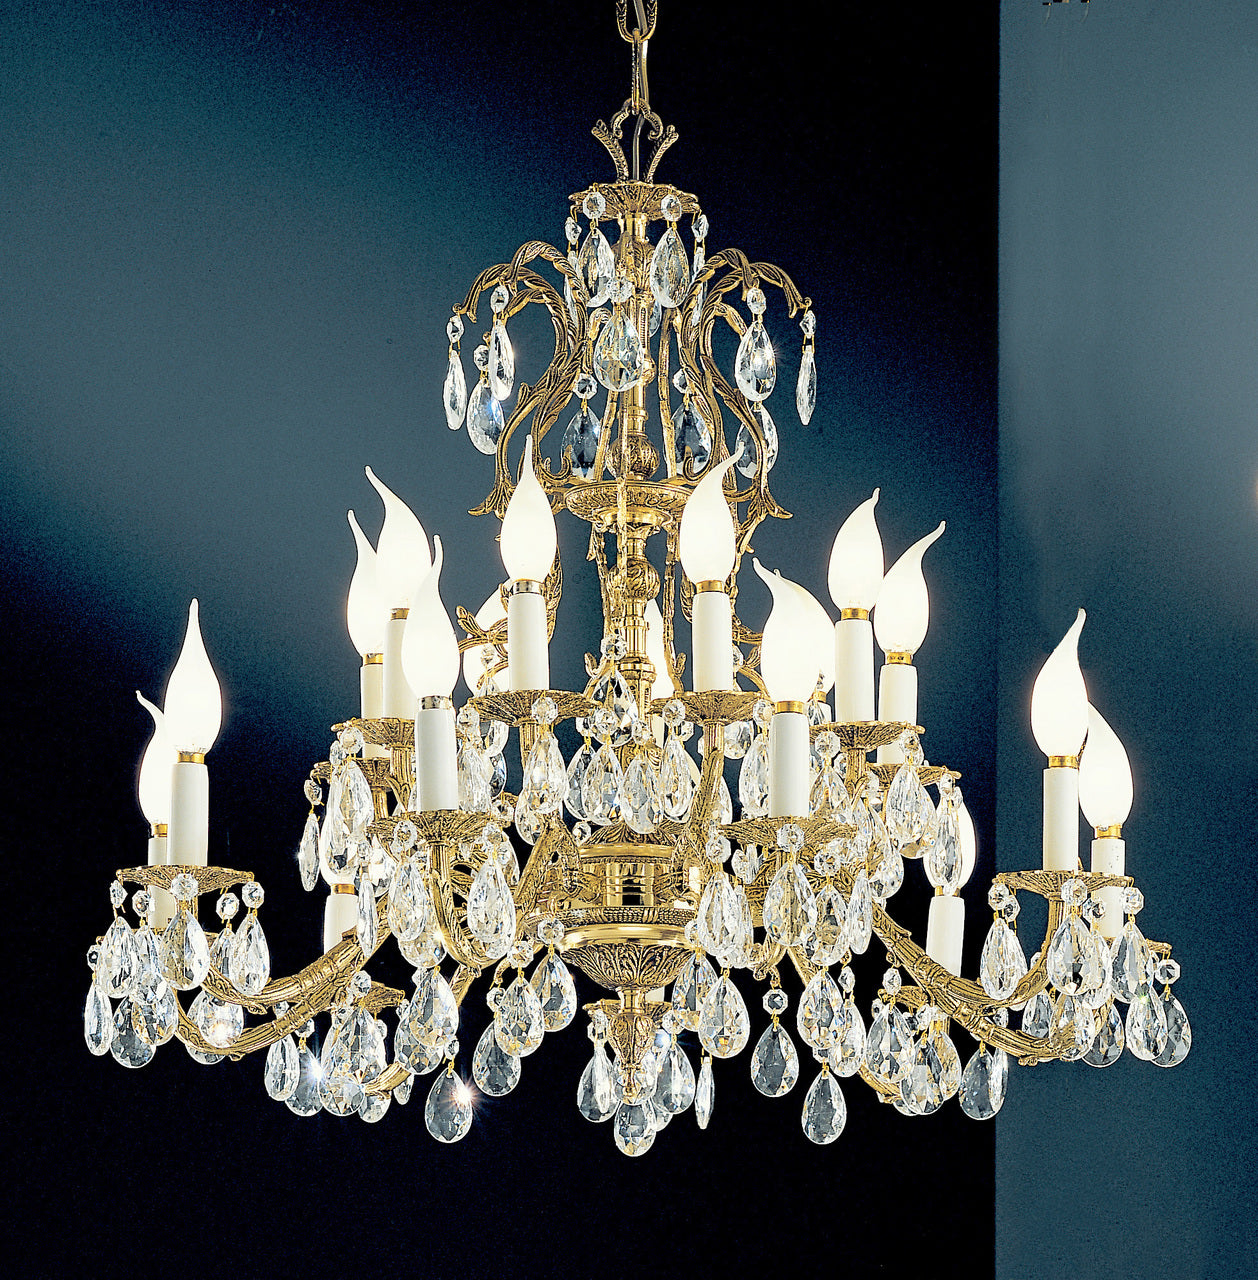 Classic Lighting 5518 OWB C Barcelona Crystal/Cast Brass Chandelier in Olde World Bronze (Imported from Spain)